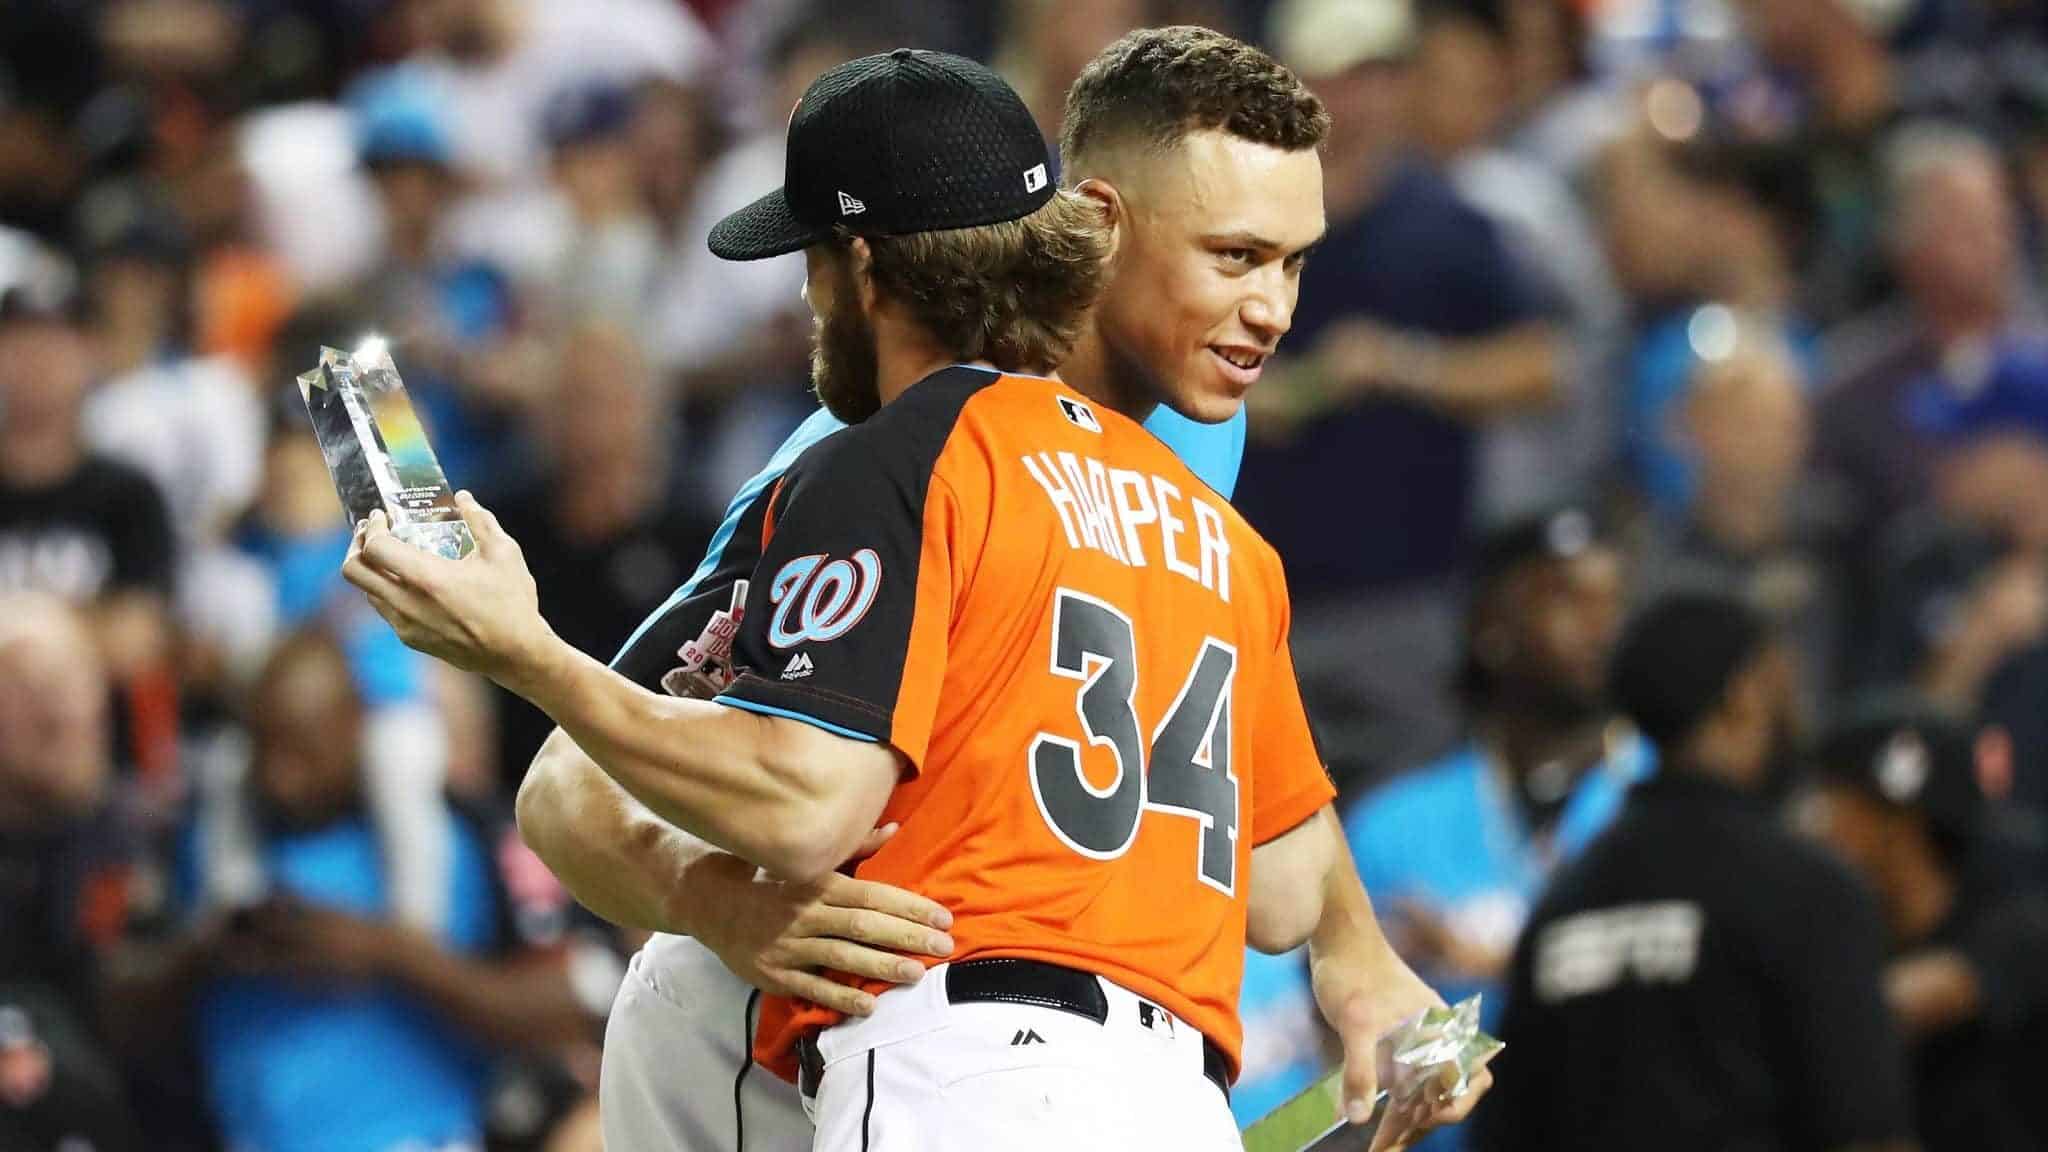 MIAMI, FL - JULY 10: Aaron Judge #99 of the New York Yankees hugs Bryce Harper #34 of the Washington Nationals and the National League in the T-Mobile Home Run Derby at Marlins Park on July 10, 2017 in Miami, Florida.